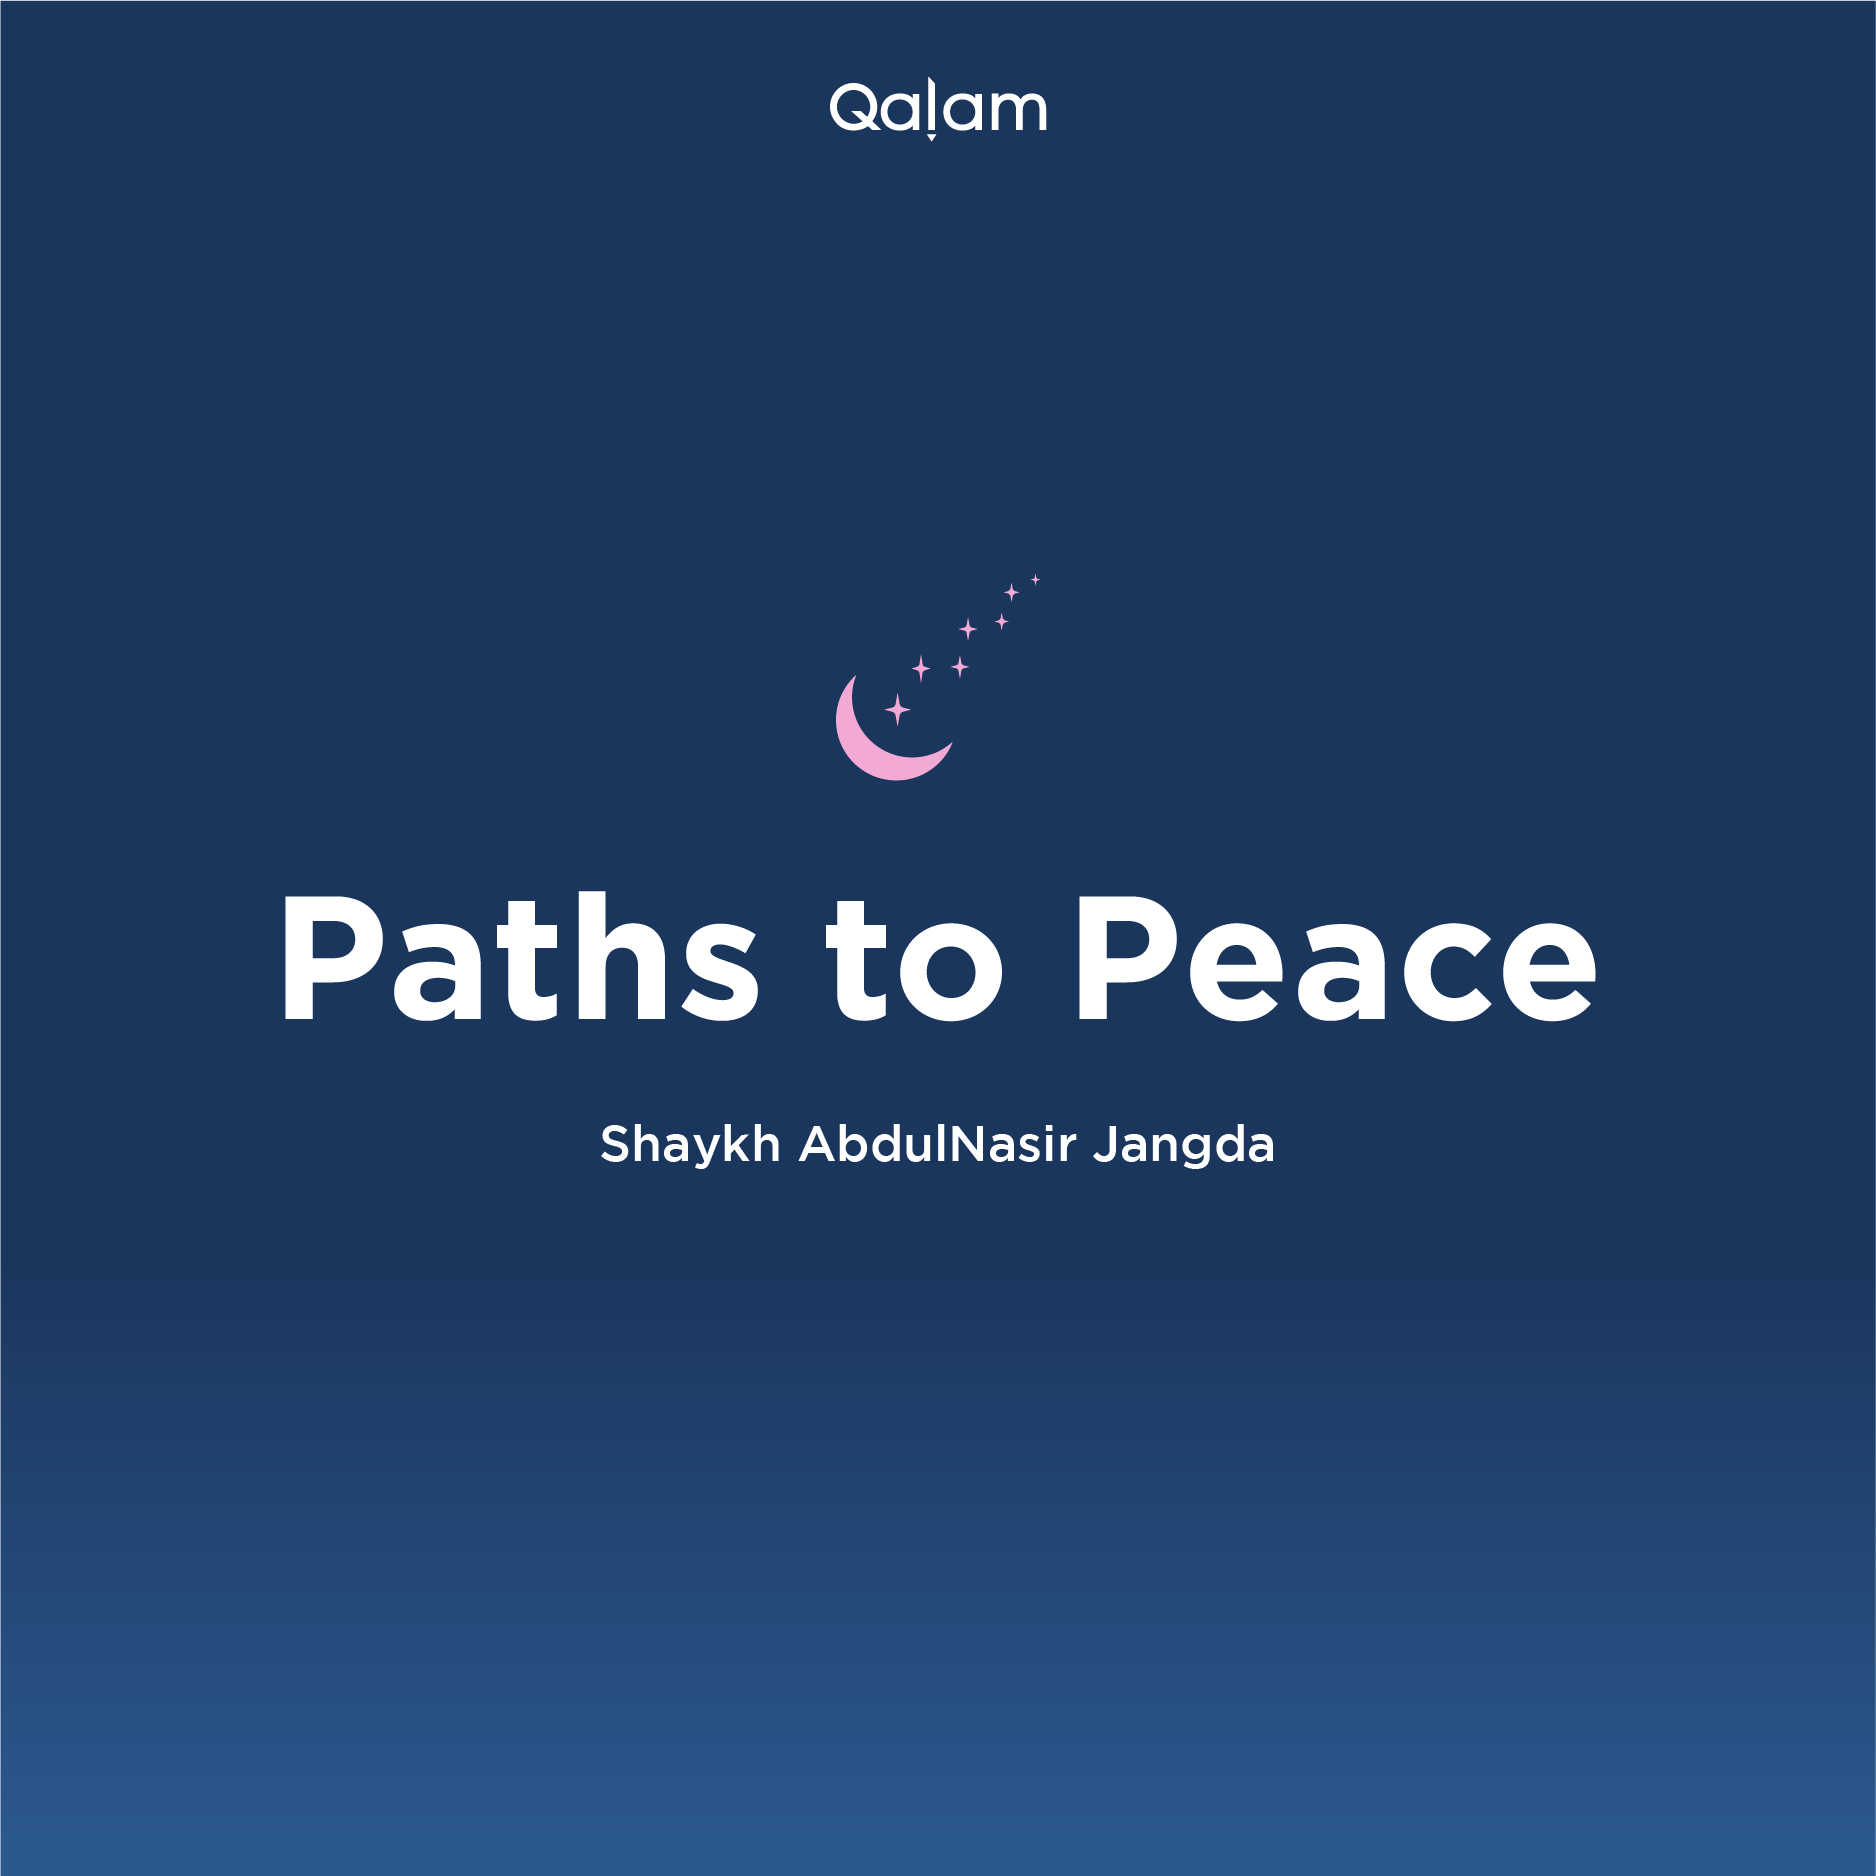 Paths to Peace: EP17